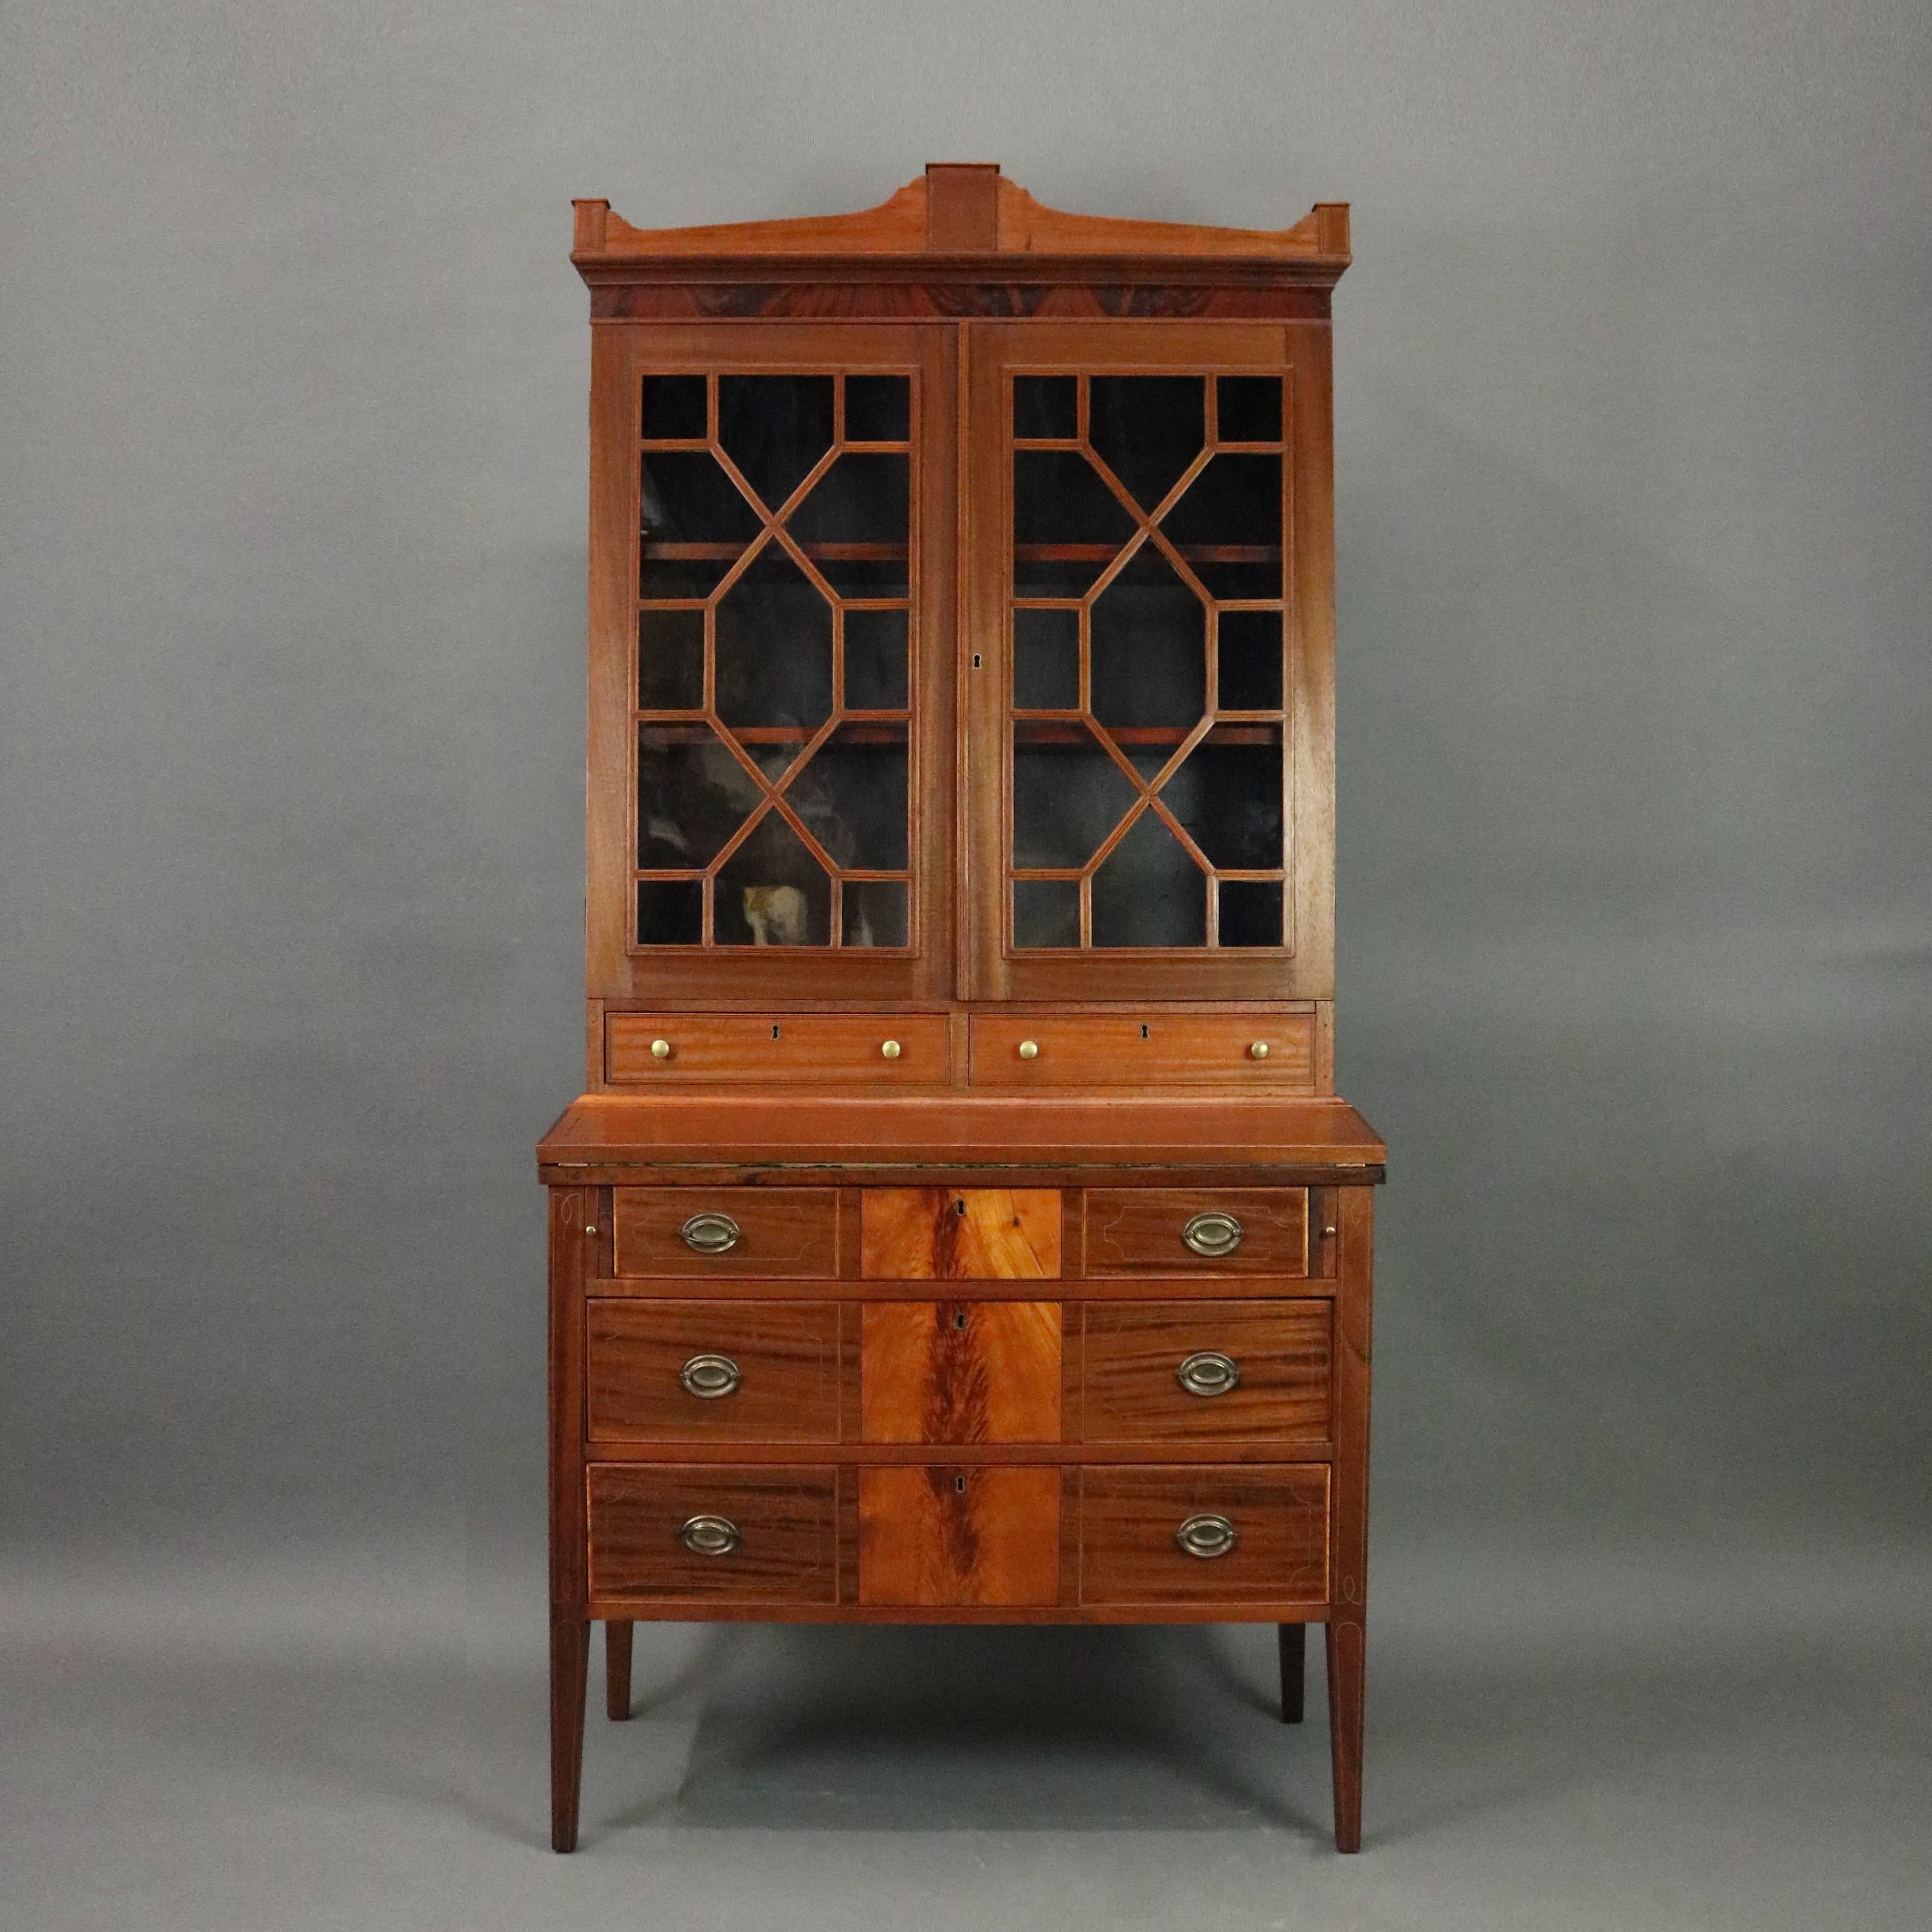 Antique American Federal secretary bookcase features mahogany construction with long drawers with flame mahogany insets below drop front writing surface opening to reveal storage drawers and pigeon hole compartments below glass front bookcase,